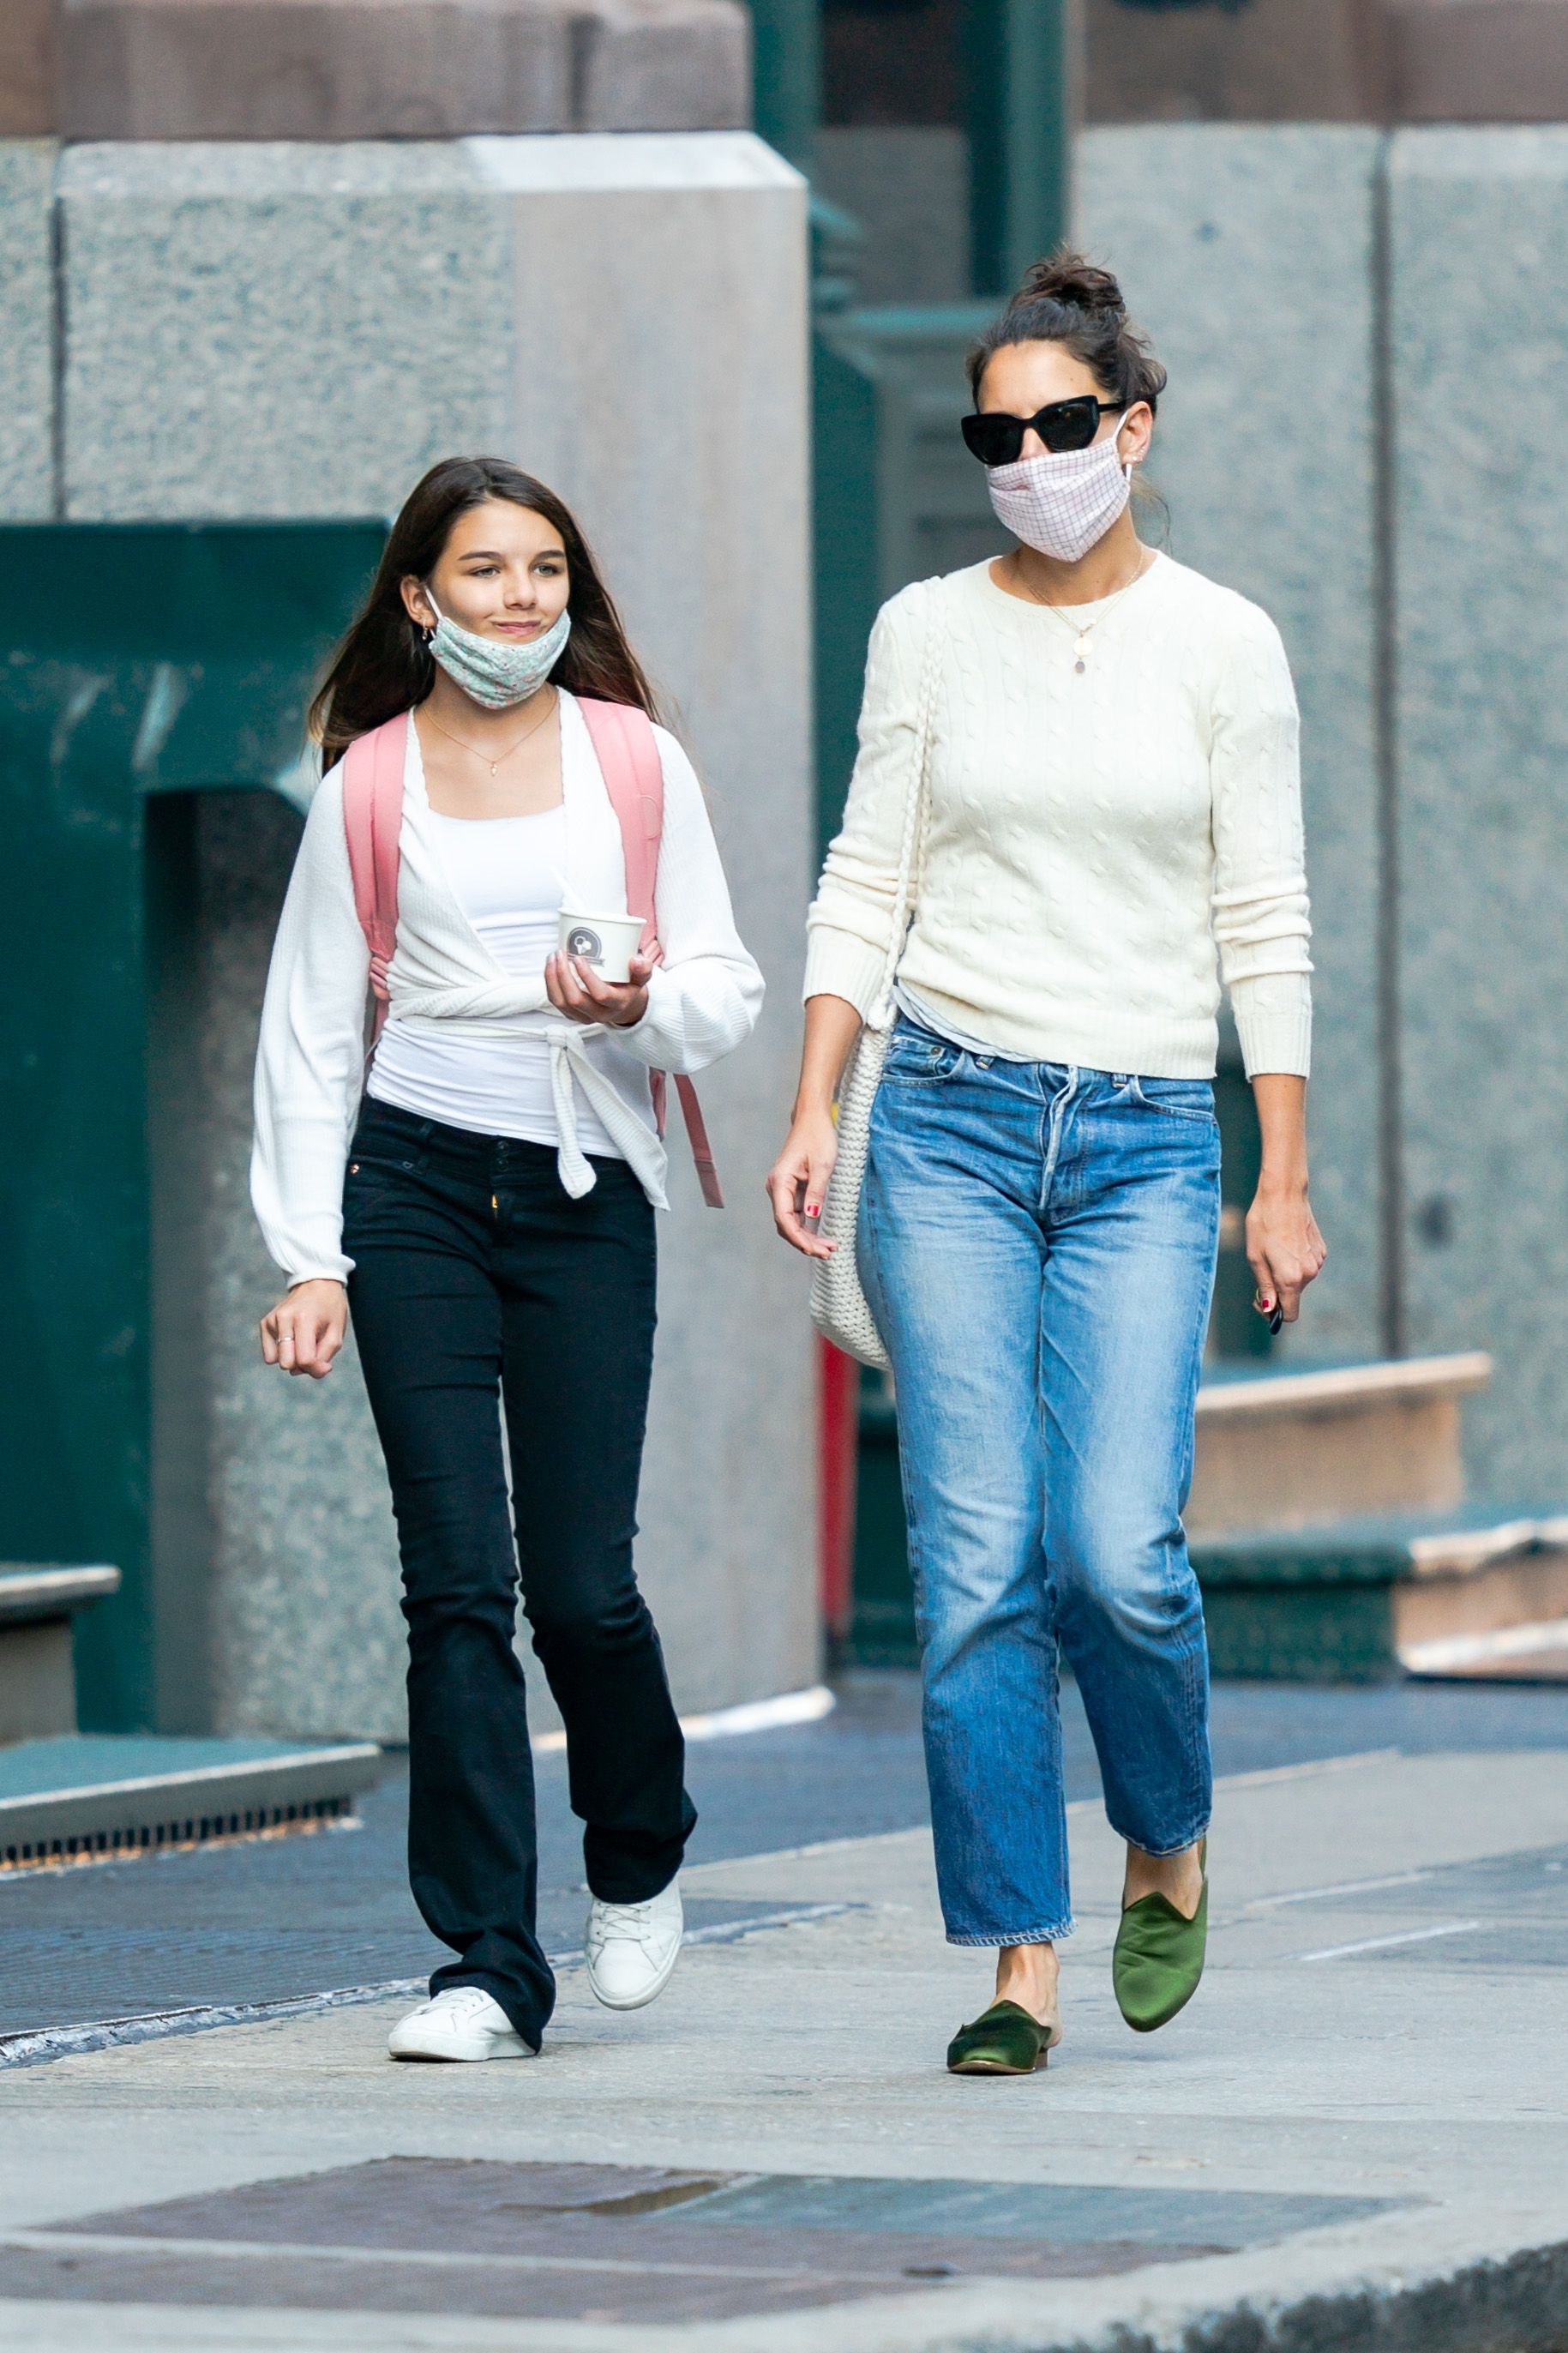 Suri Cruise and Katie Holmes on September 08, 2020 in New York City. | Source: Getty Images